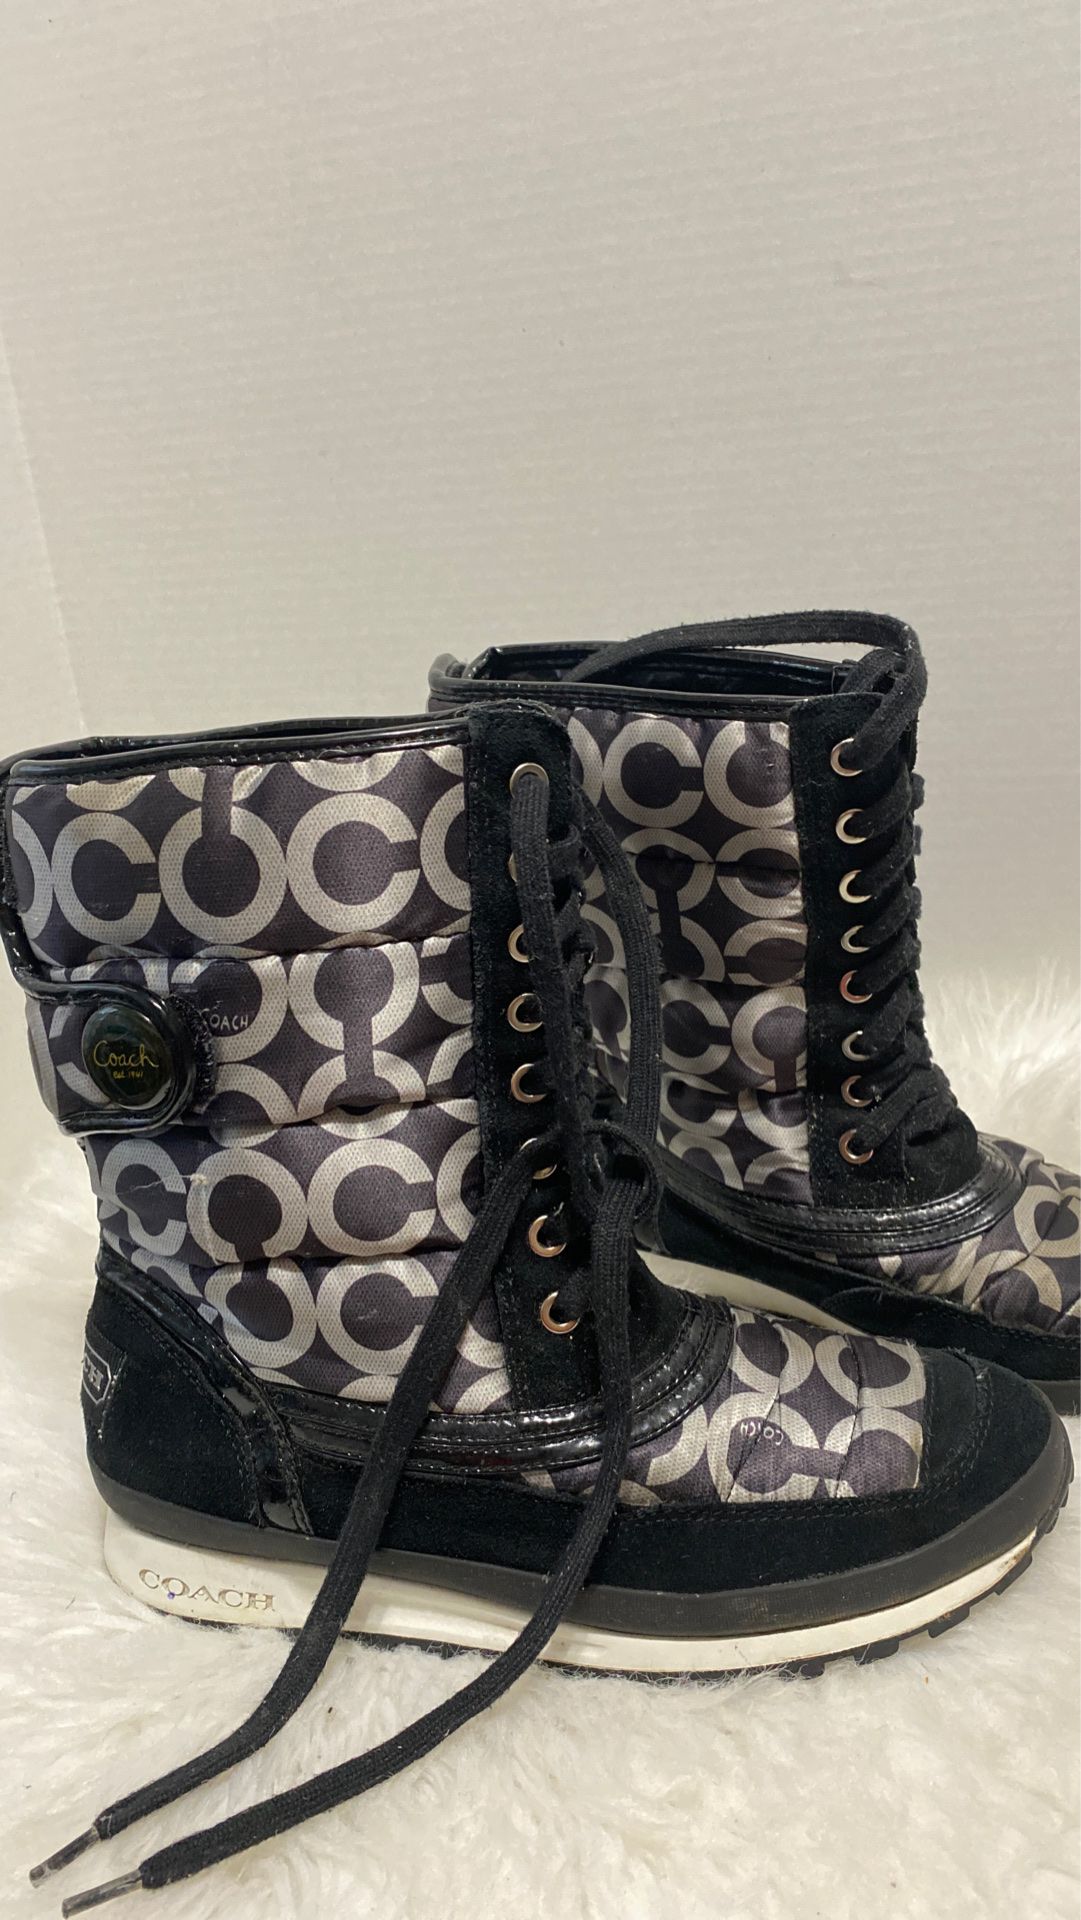 Coach Dorian F2370 quilted boots -size 8.5